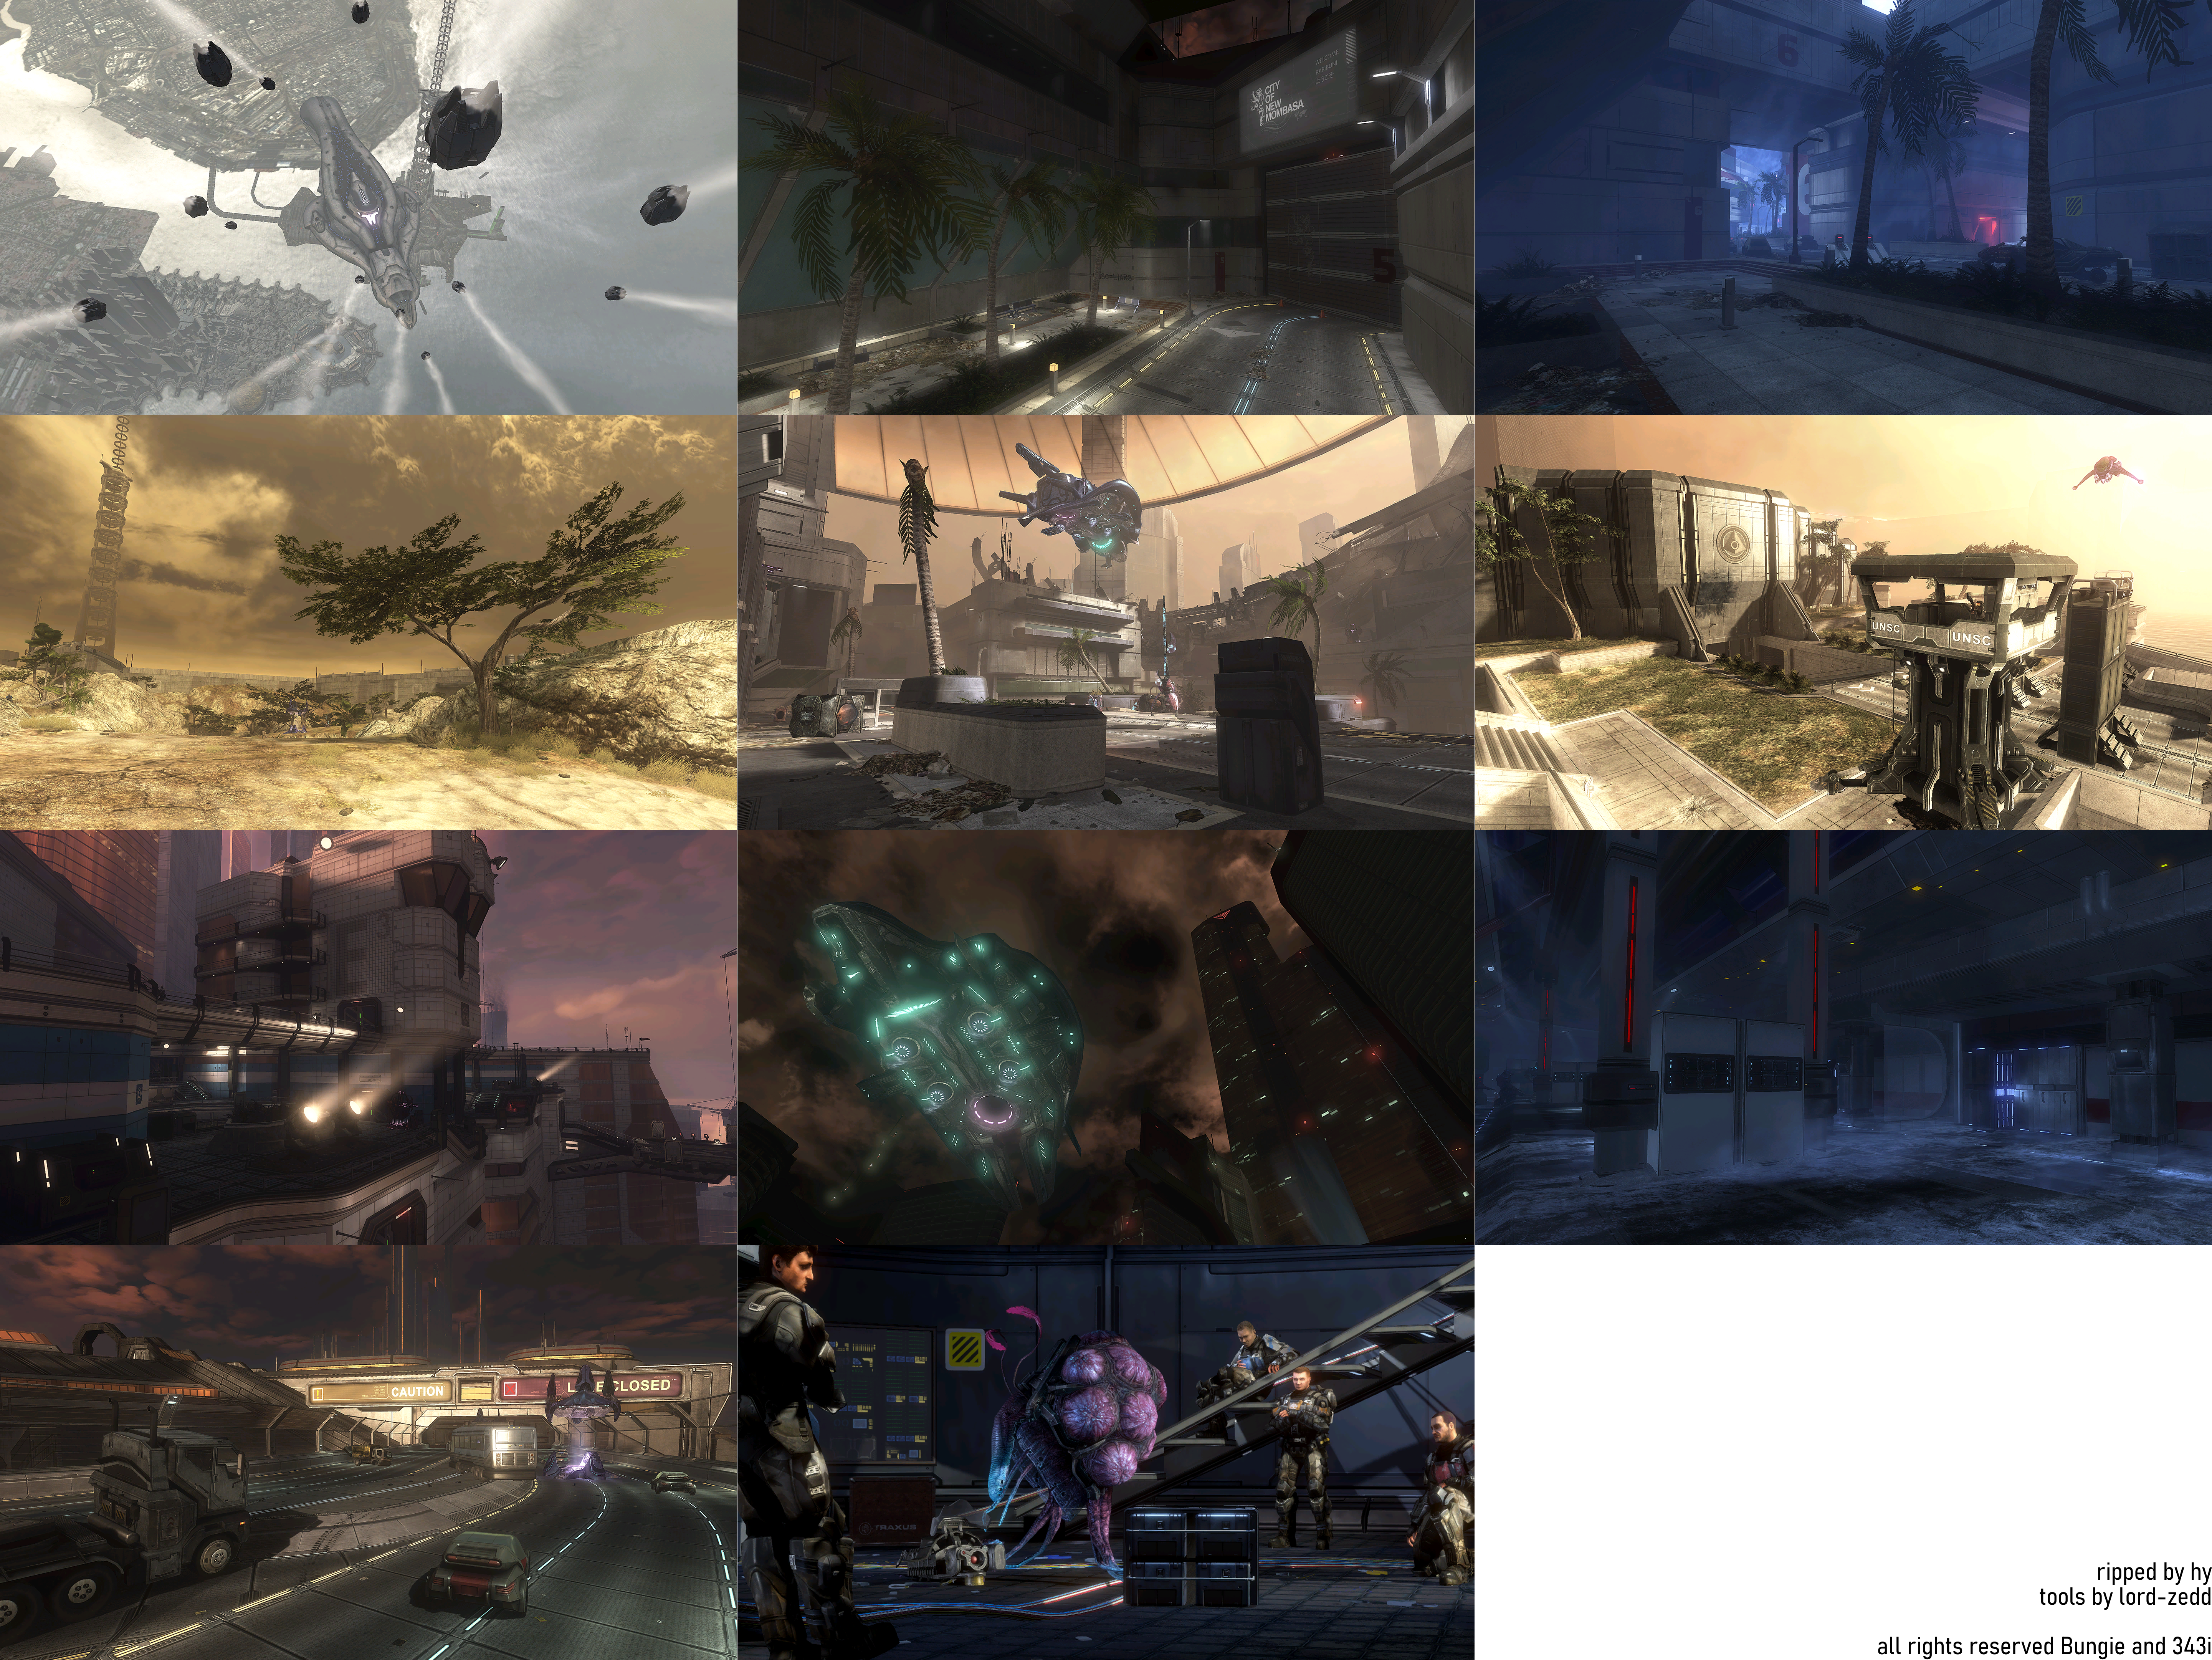 Halo: The Master Chief Collection - Halo 3: ODST Campaign Level Loading Screens